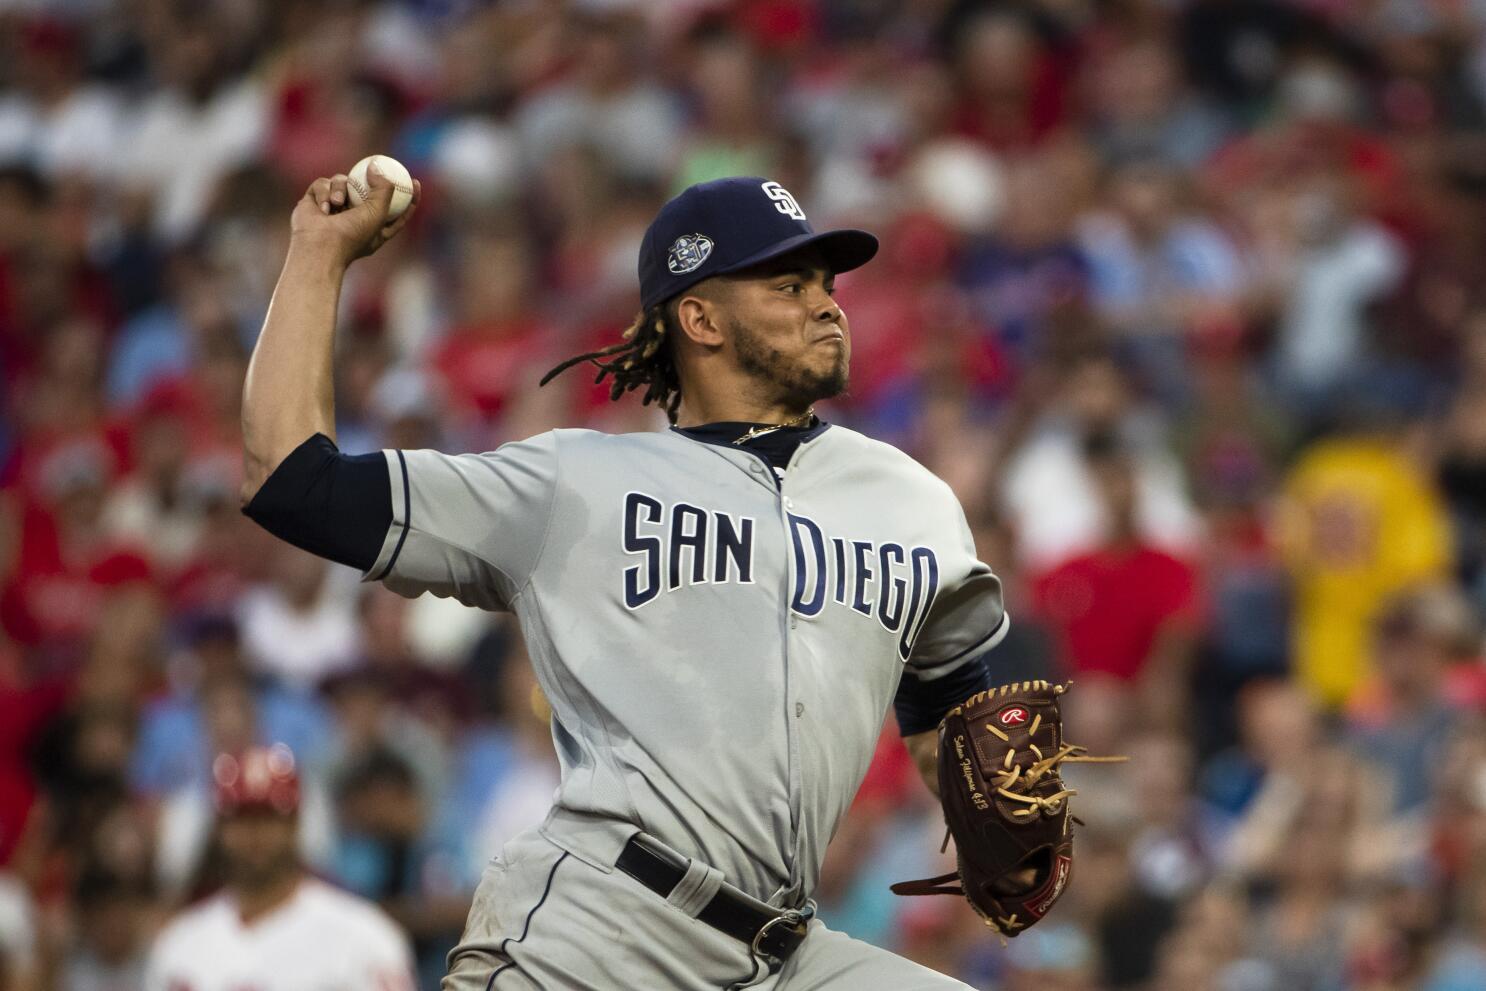 Padres finish home slate by routing Cardinals - The San Diego Union-Tribune